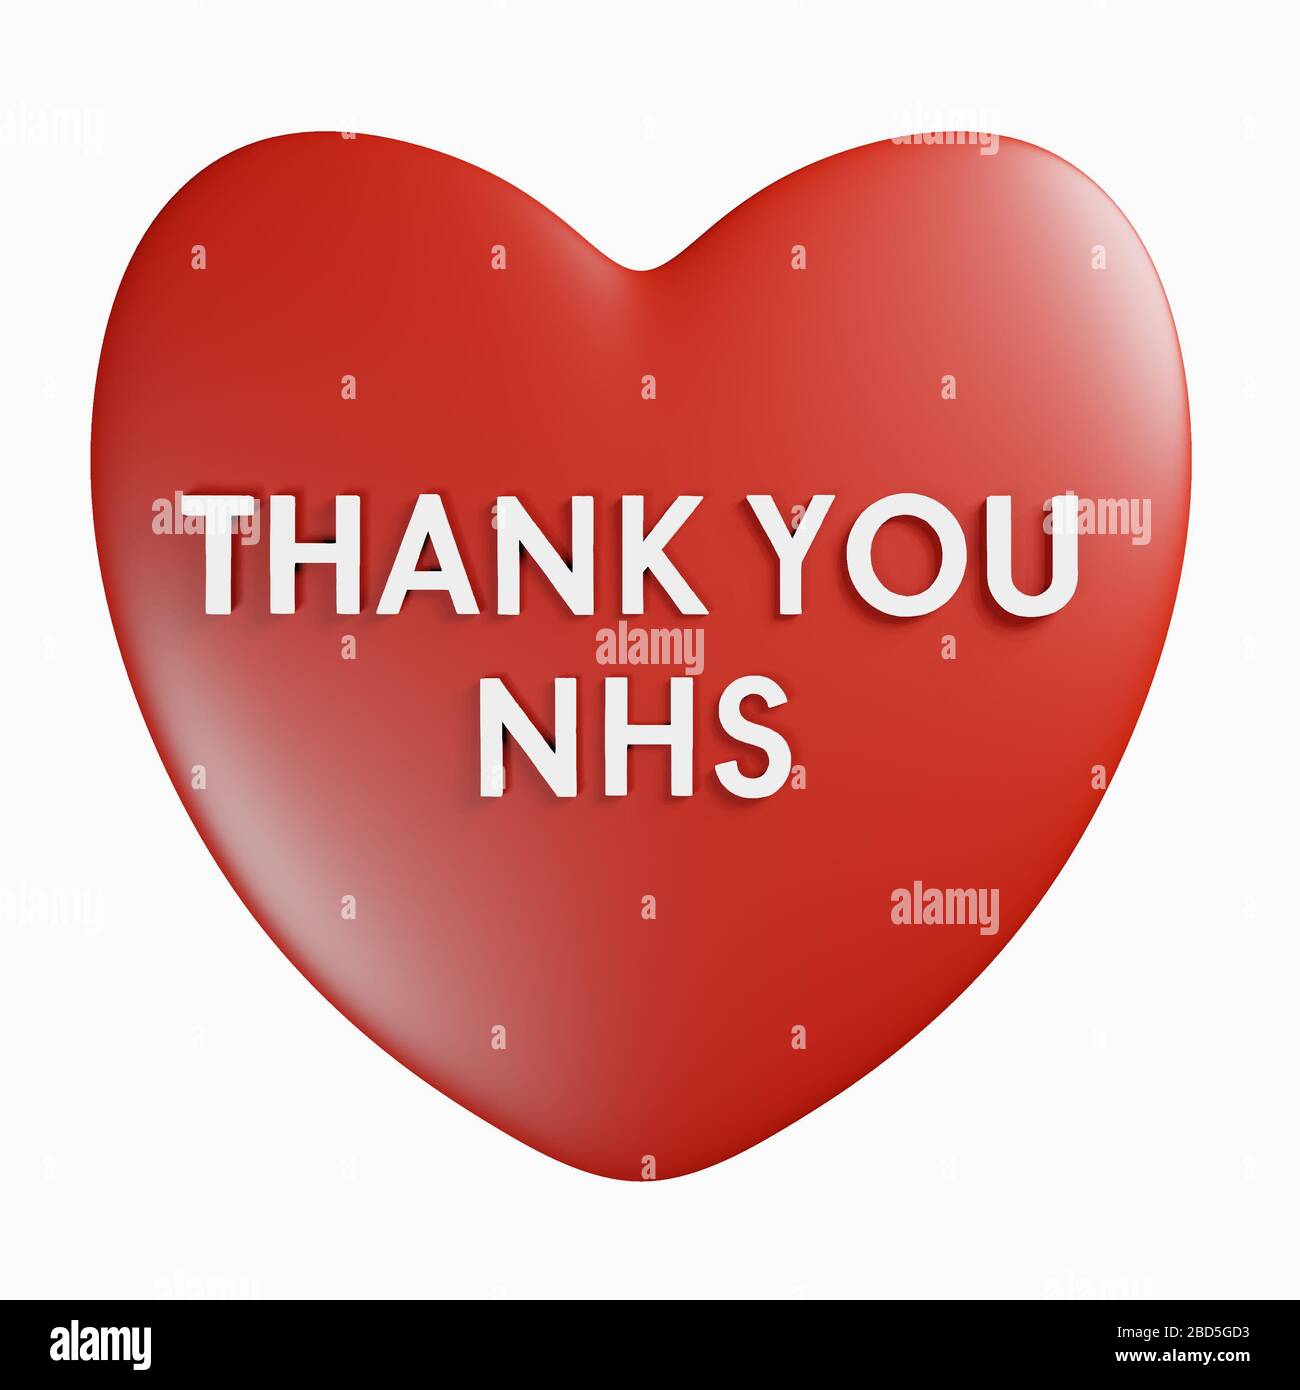 Thank You NHS banner, appreciation of the effort of medical healthcare workers during the Covid-19 Coronavirus pandemic, Illustration Stock Photo